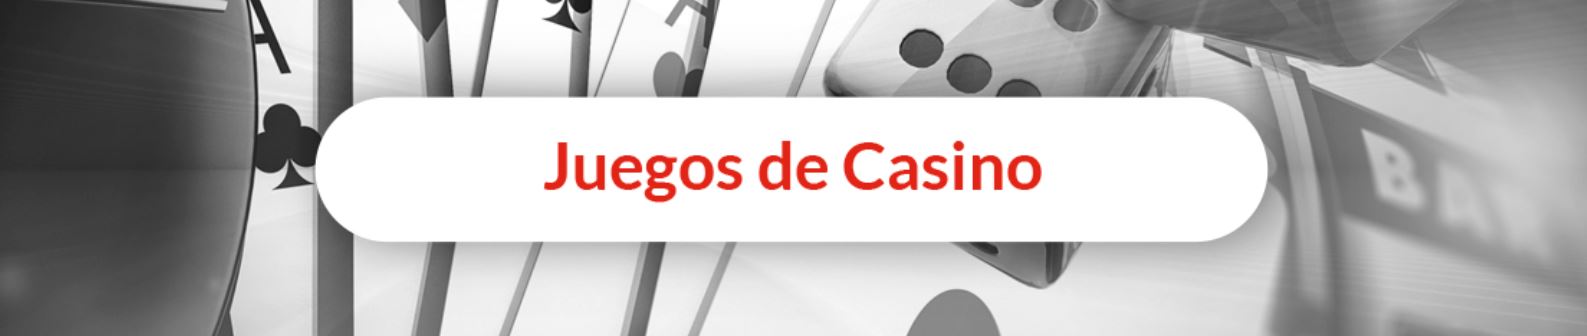 Brand Apuestas casino offers a wide variety of games of chance.